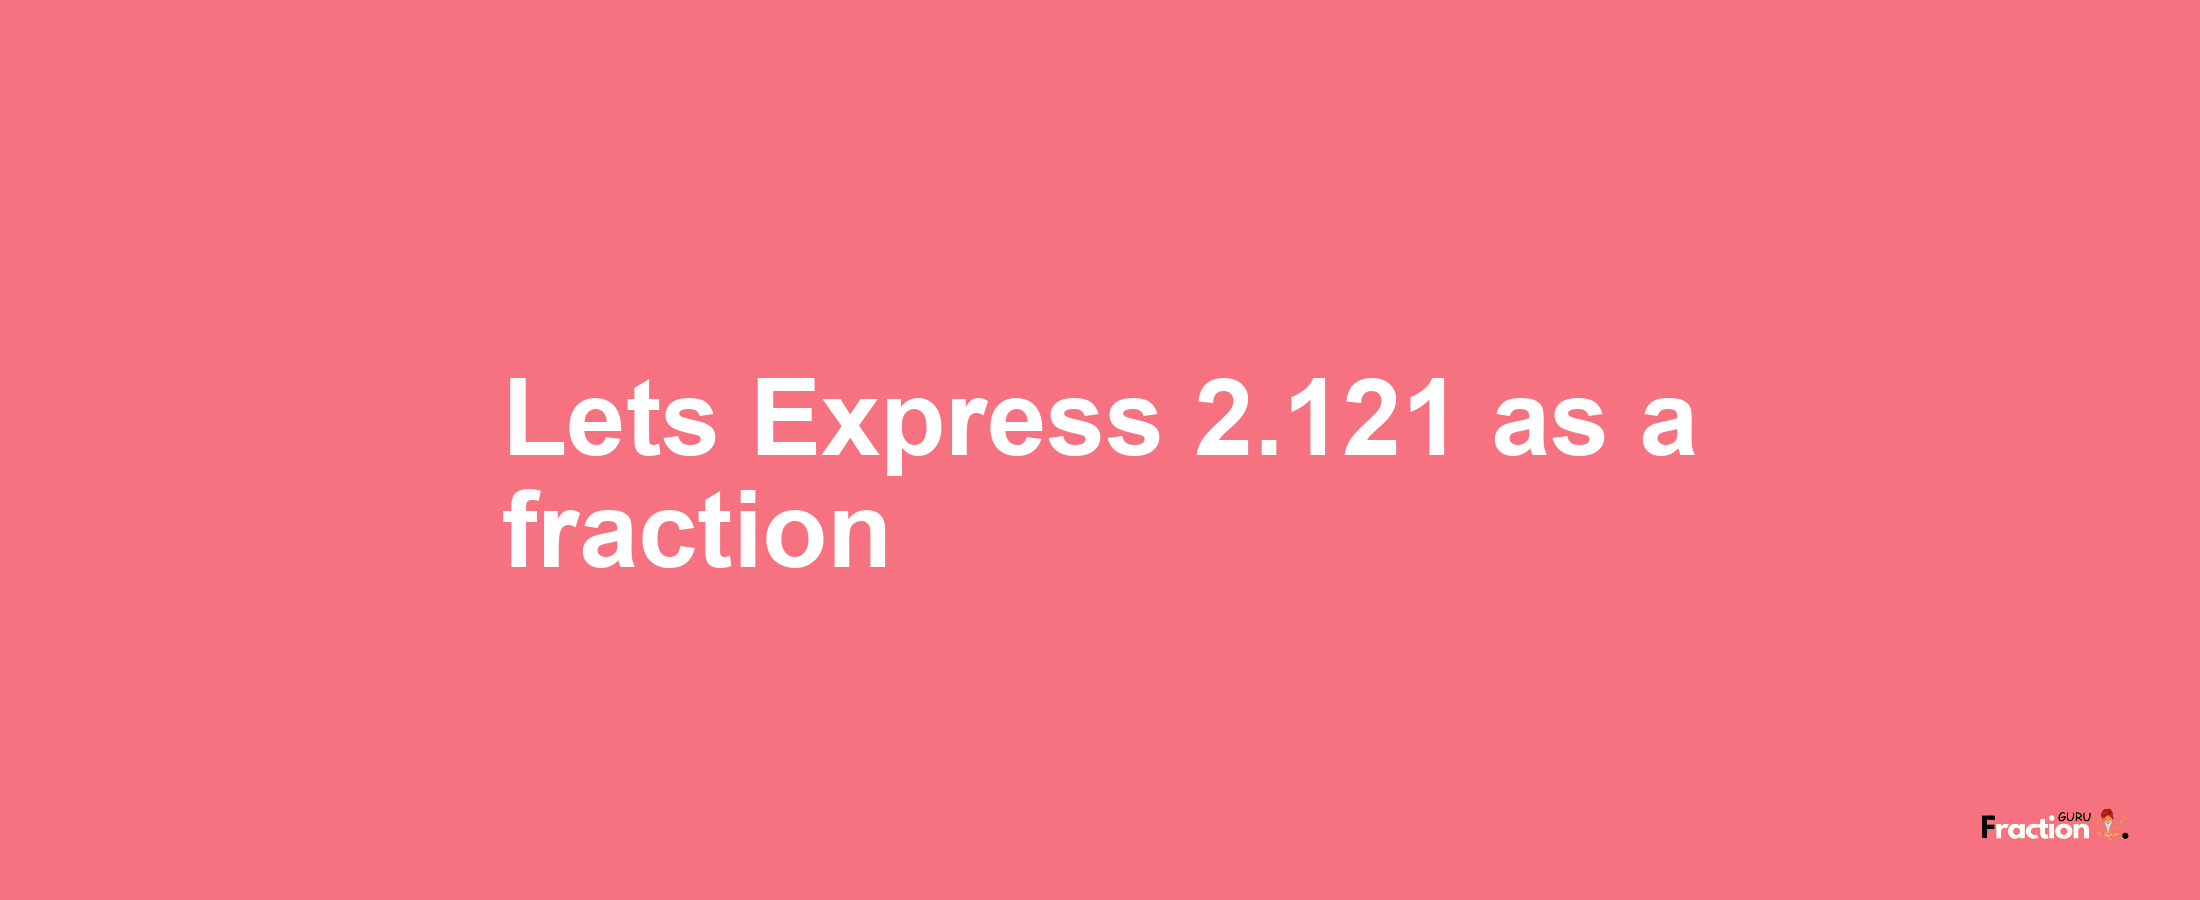 Lets Express 2.121 as afraction